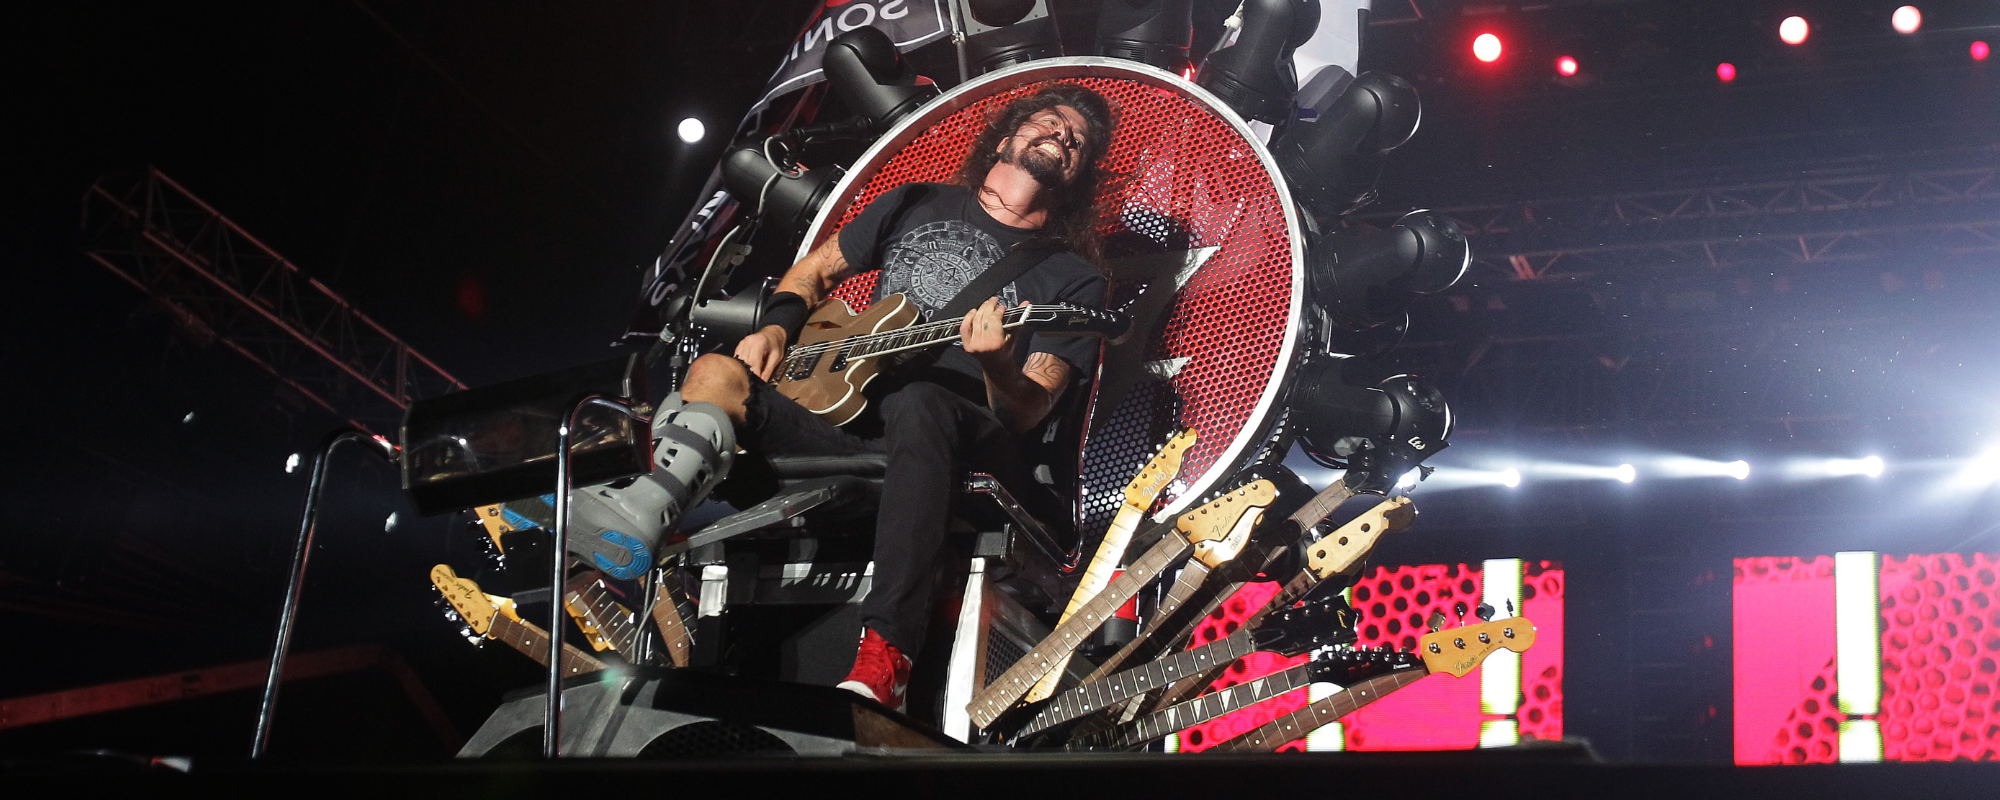 Remember When: Dave Grohl Falls Off Stage and Breaks His Leg